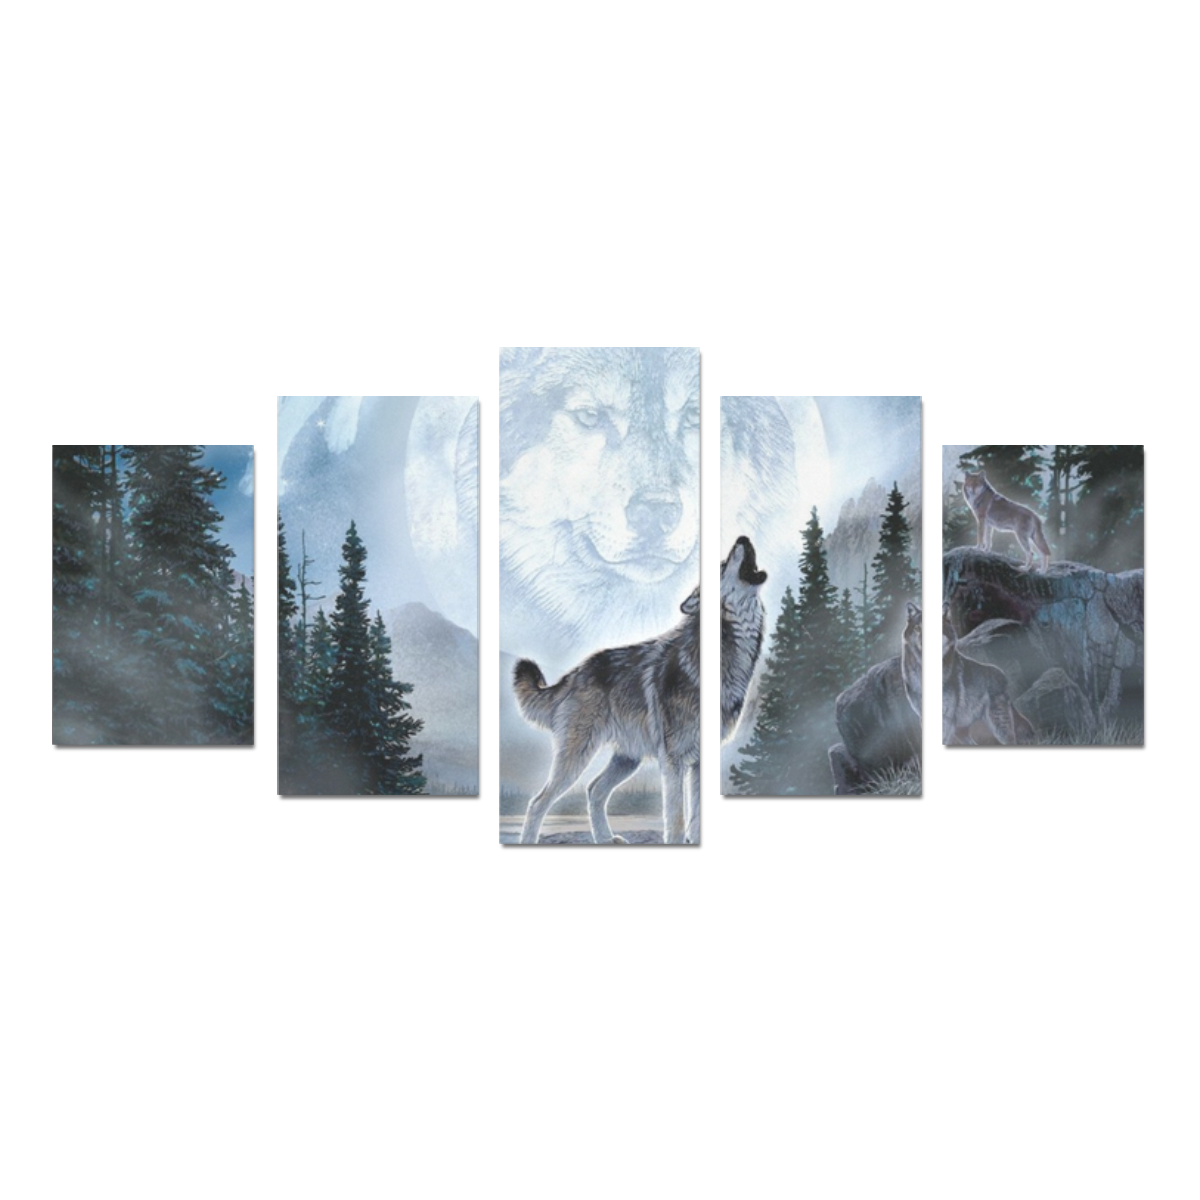 Spirit Of The Wolf Canvas Print Sets D (No Frame)